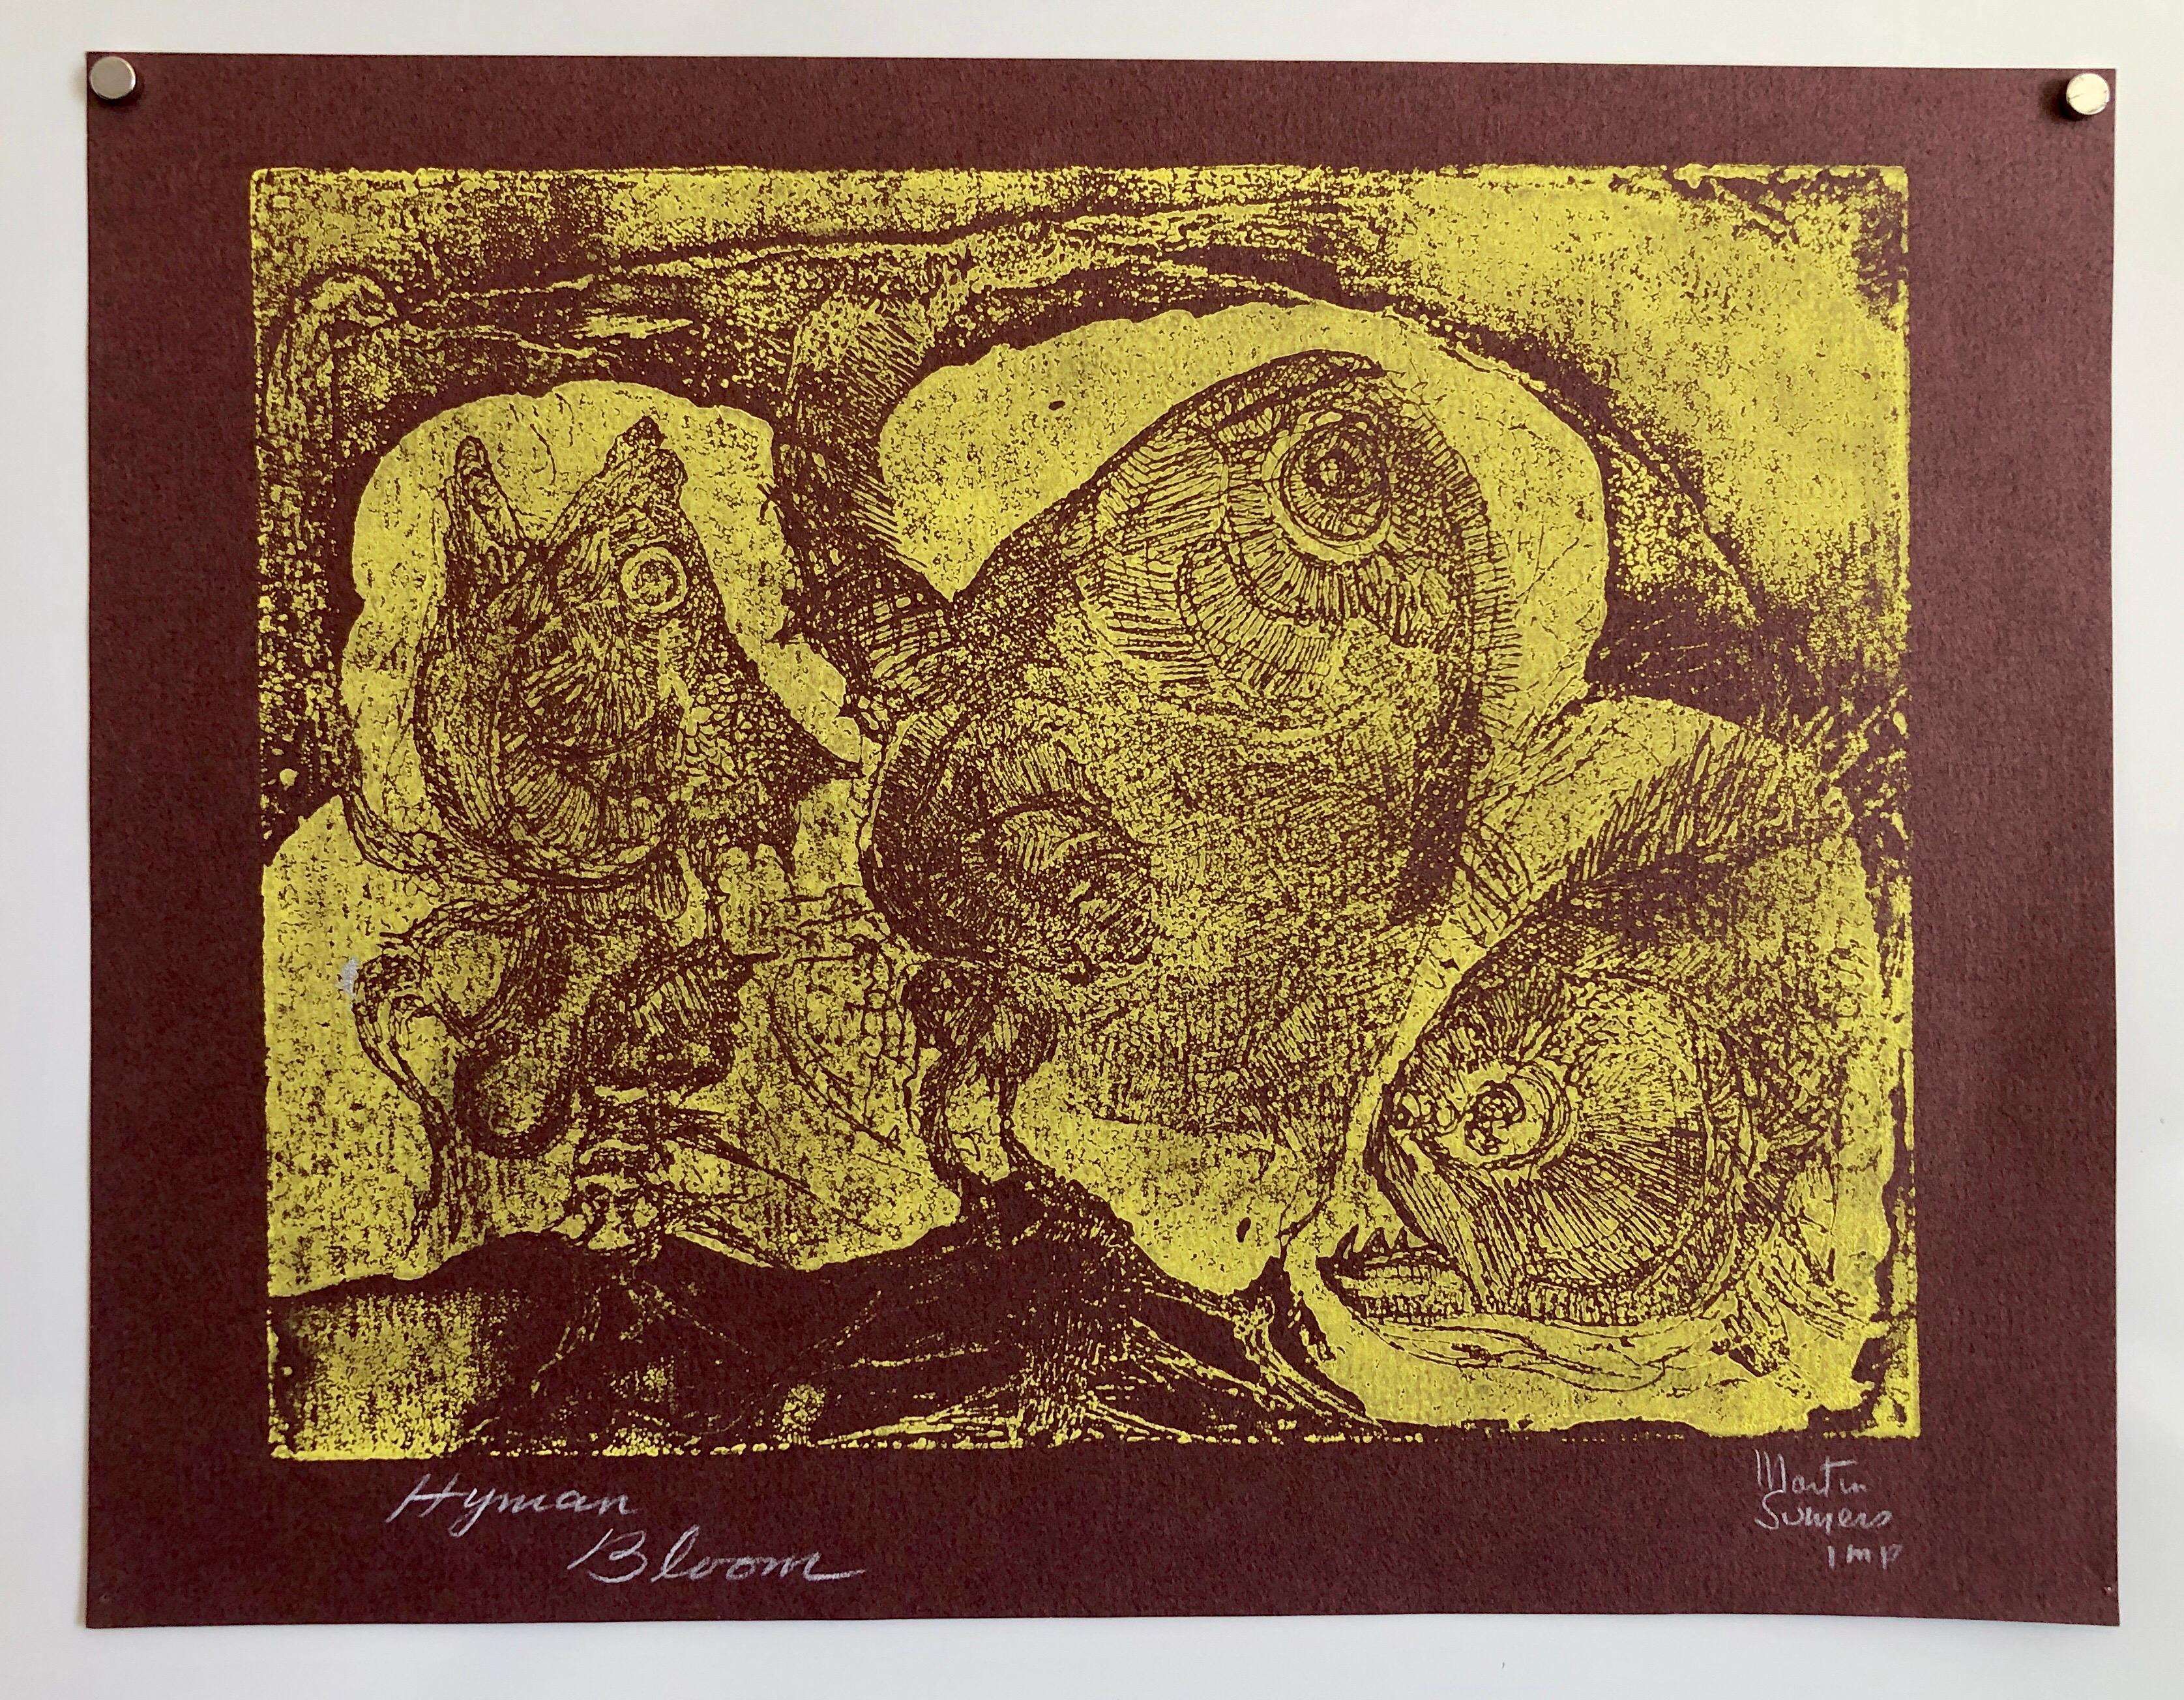 Boston Abstract Expressionist Hyman Bloom Monoprint Monotype Print Martin Sumers 1